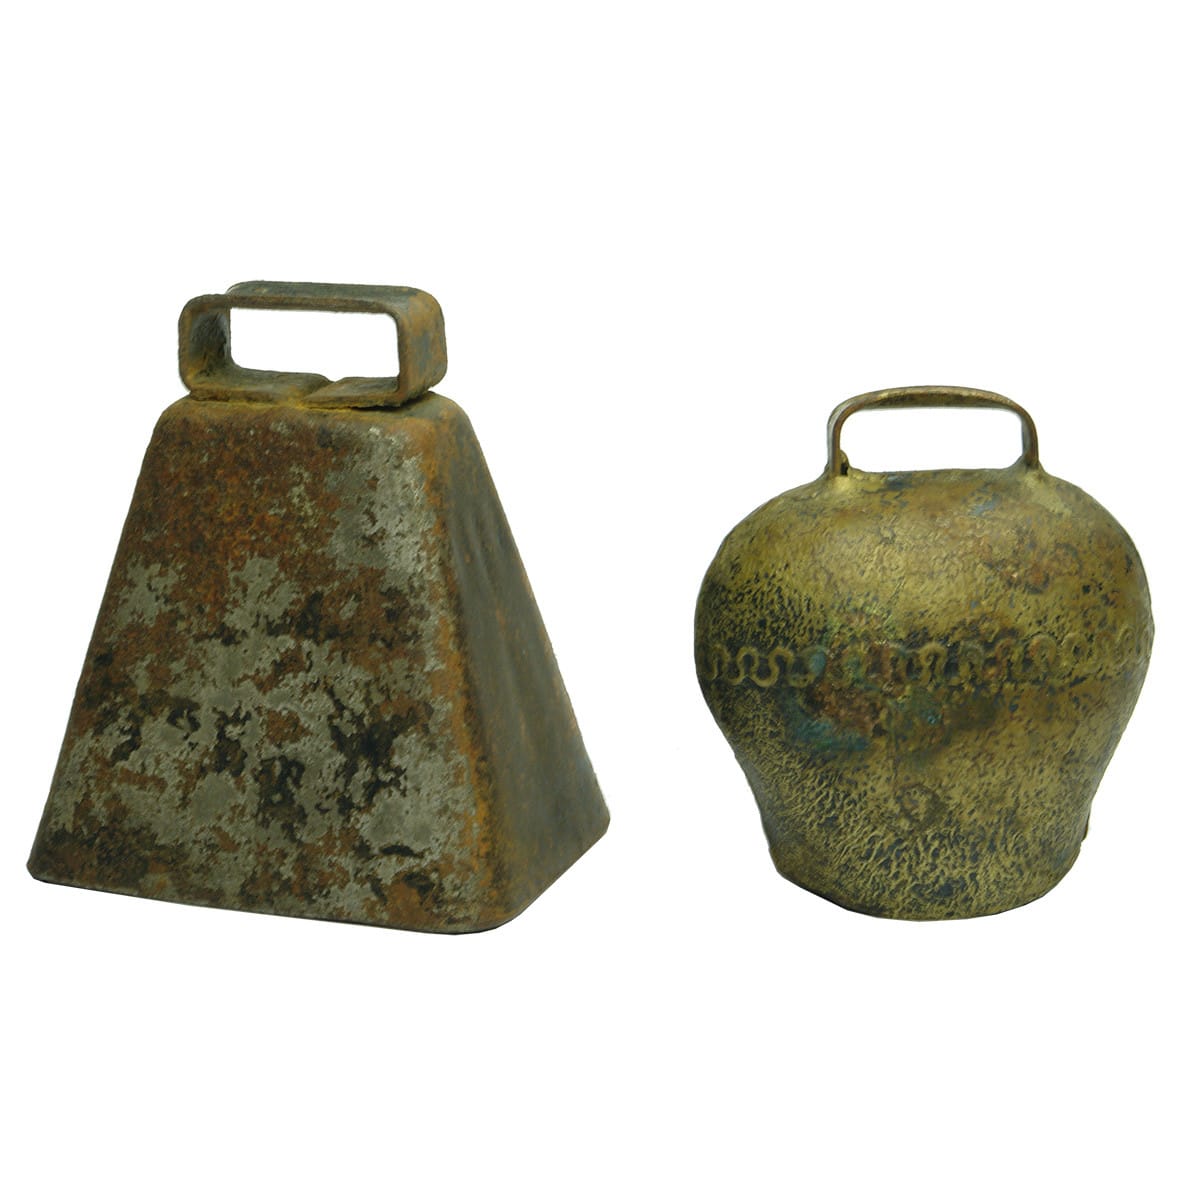 Pair of Cow Bells: Medium Squarish one and small brass one with squiggled pattern.